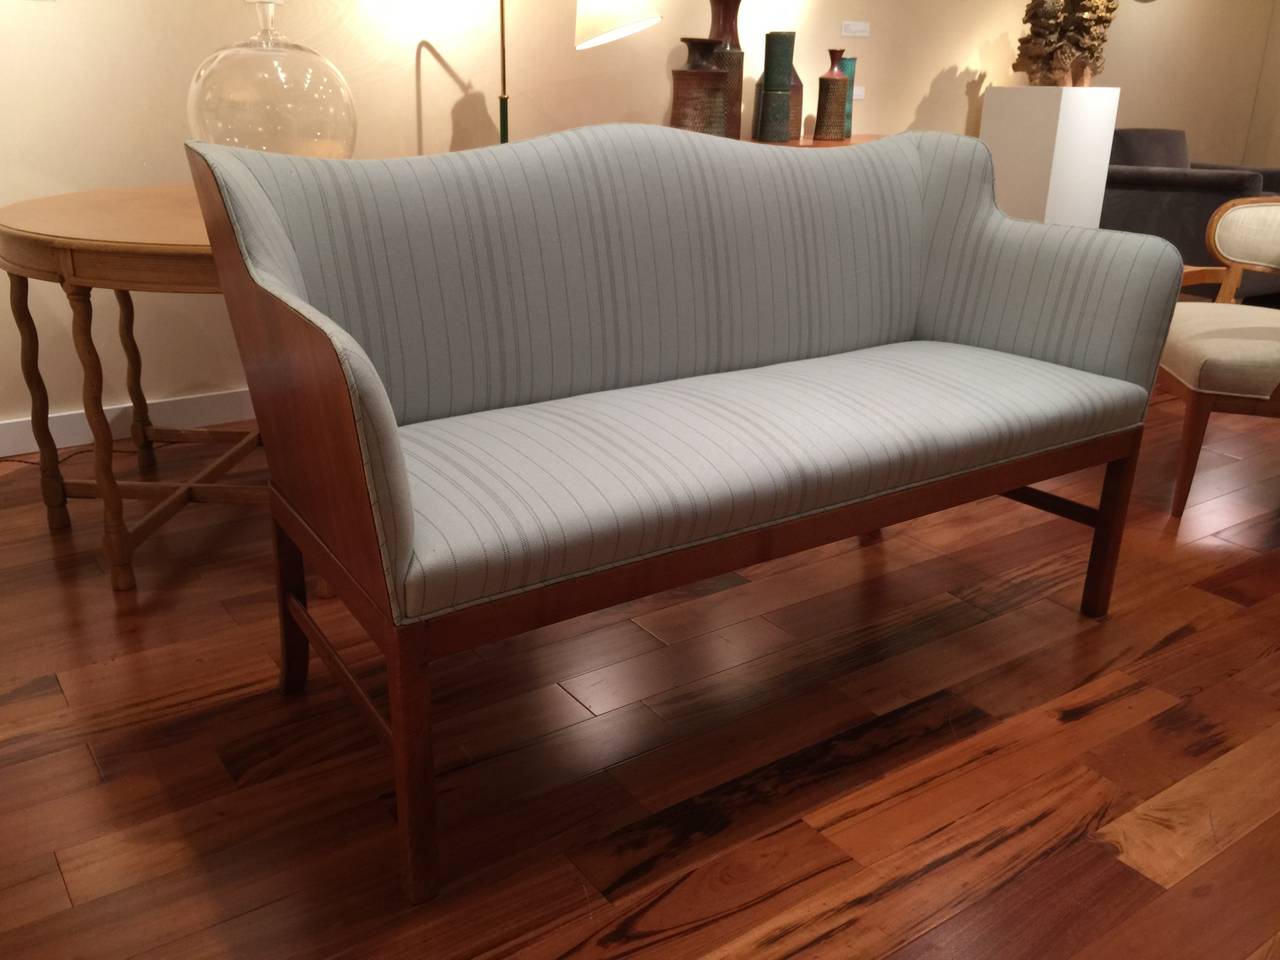 Ole Wanscher (1903-1985).

Rare loveseat by Ole Wanscher for A.J. Iversen, Denmark, circa 1940.
Beautiful mahogany idea and back with new upholstery. 

Dimensions: 60” W x 24.5” D x 33.5” H.